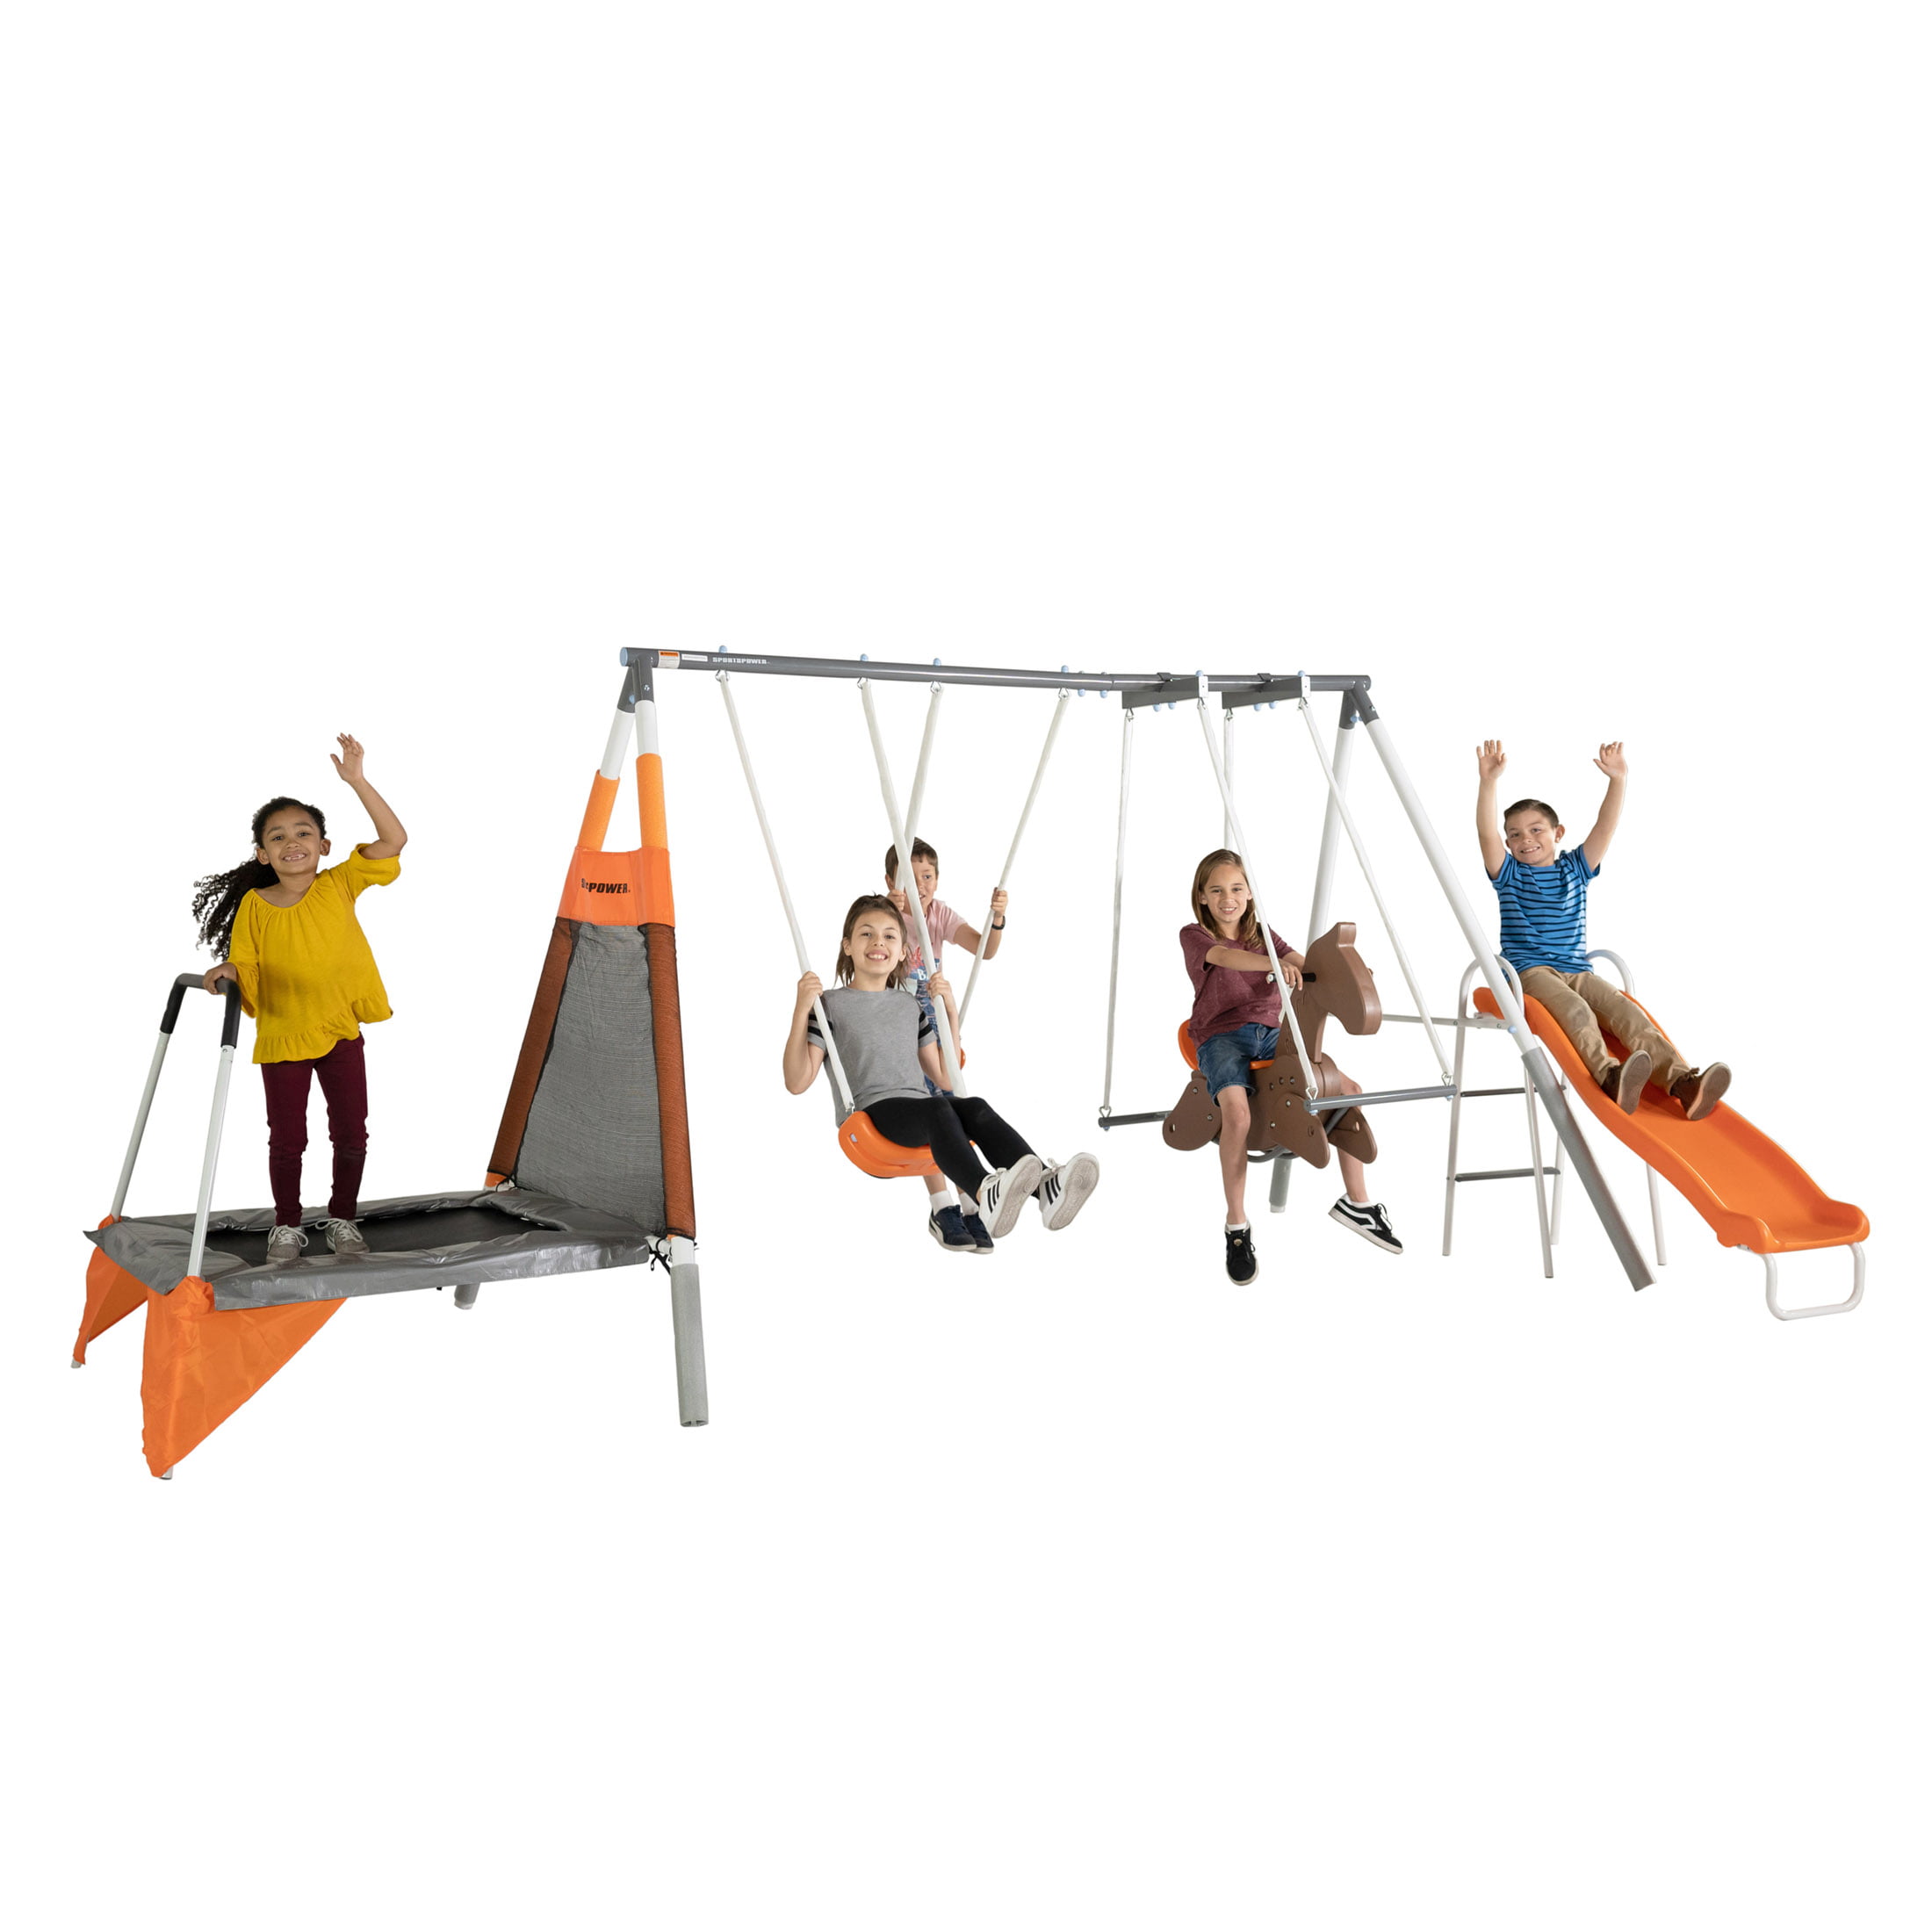 Details about   12" Swing Set Swings with Platforms and Disc Playground Accessories Yellow US 